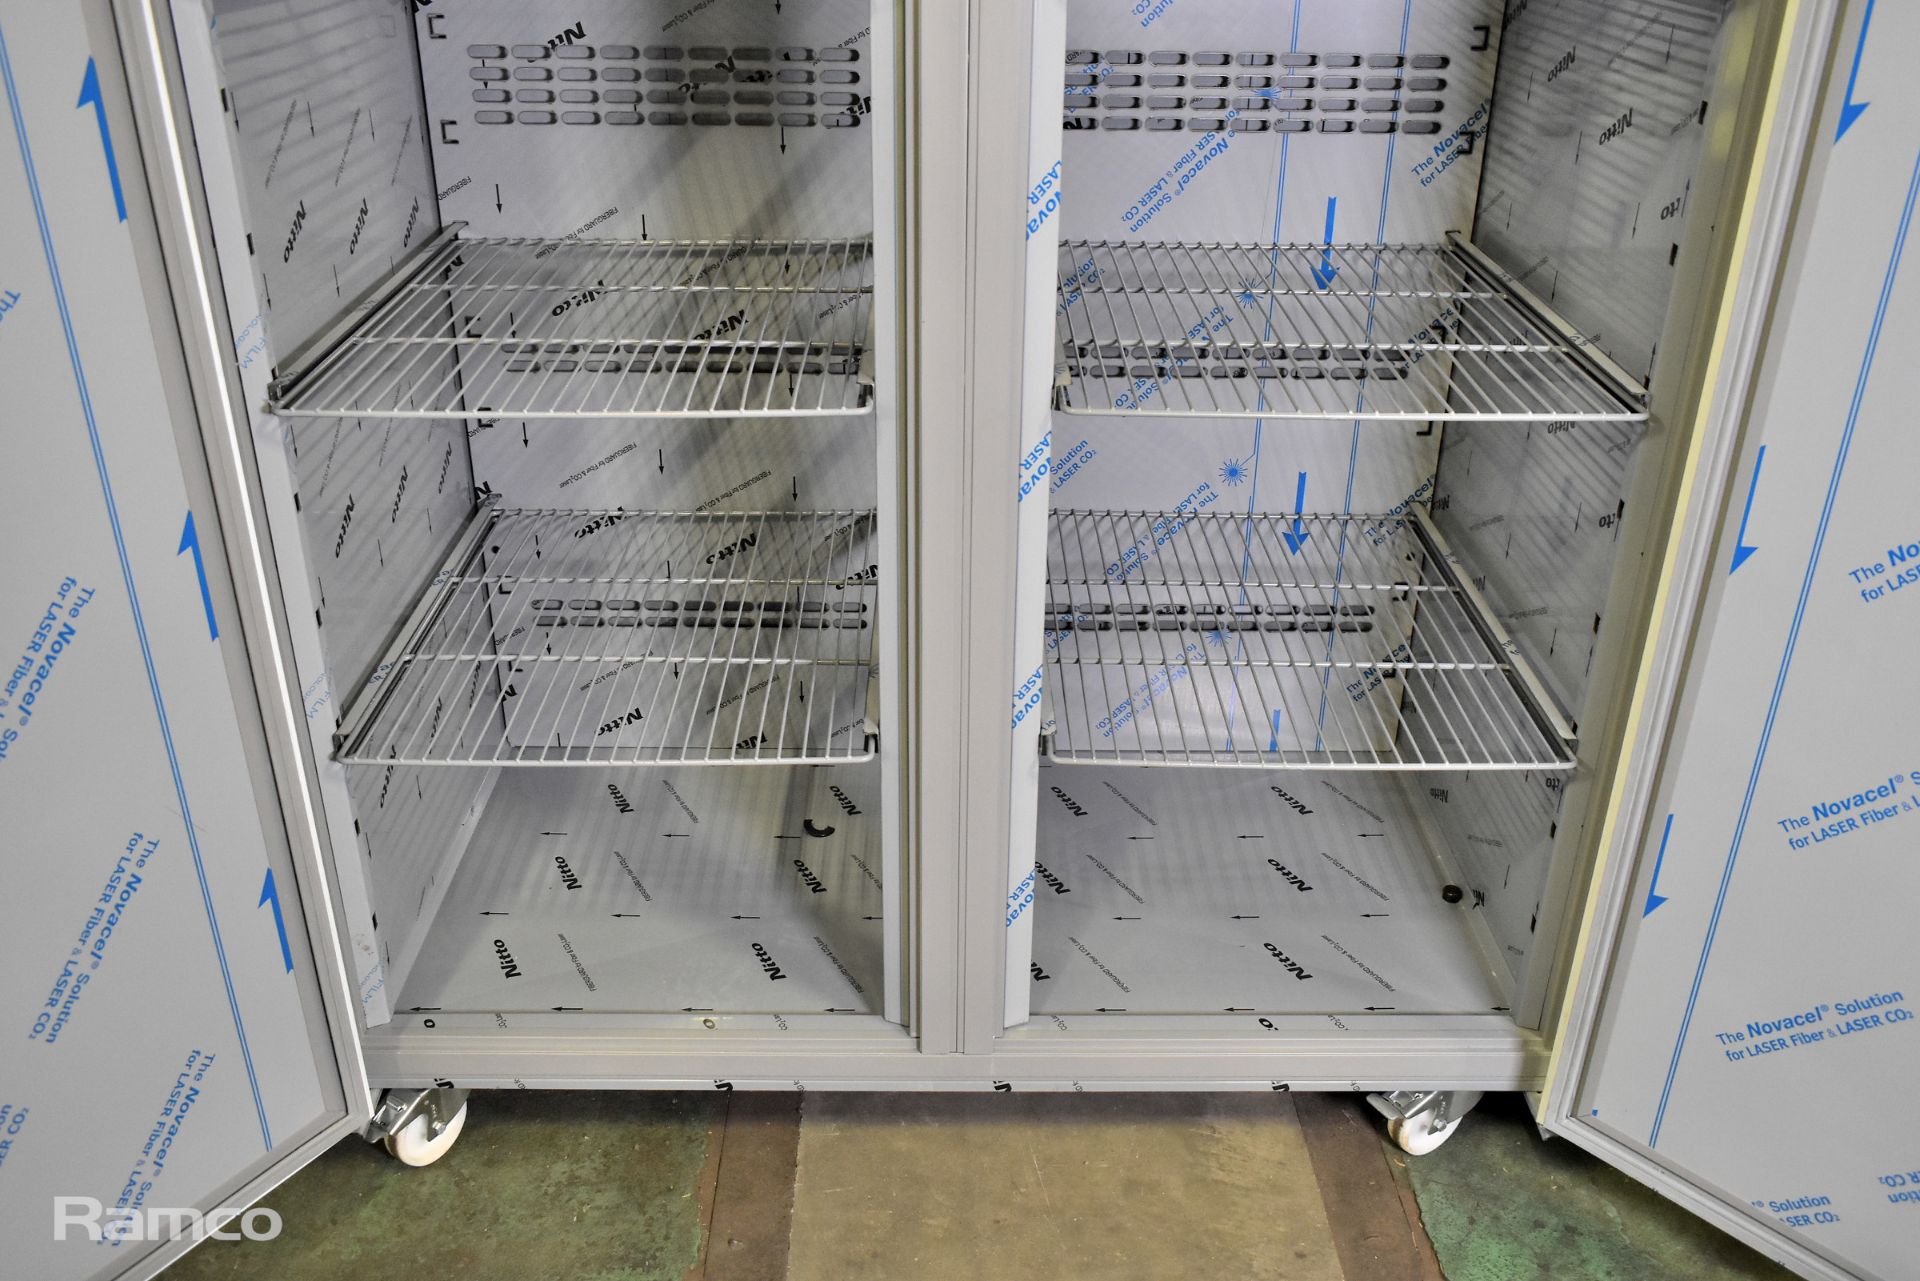 Iceinox VTS 1340 CR stainless steel, upright, double door refrigerator with 6 adjustable shelves - Image 2 of 6